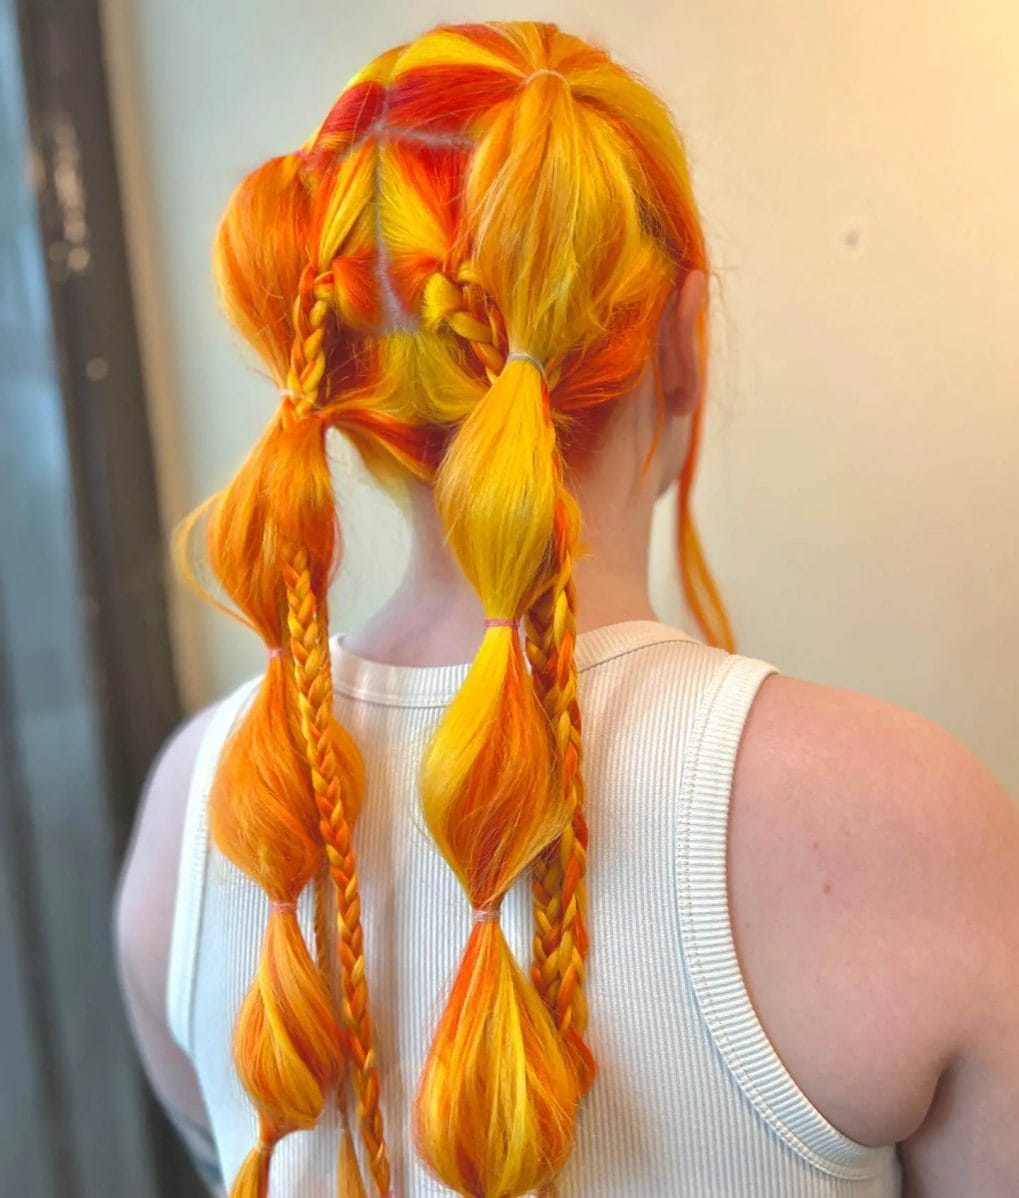 OmbrÃ© twin braids in fiery shades of orange, red, and yellow, ending in whimsical tassels for a festival look.